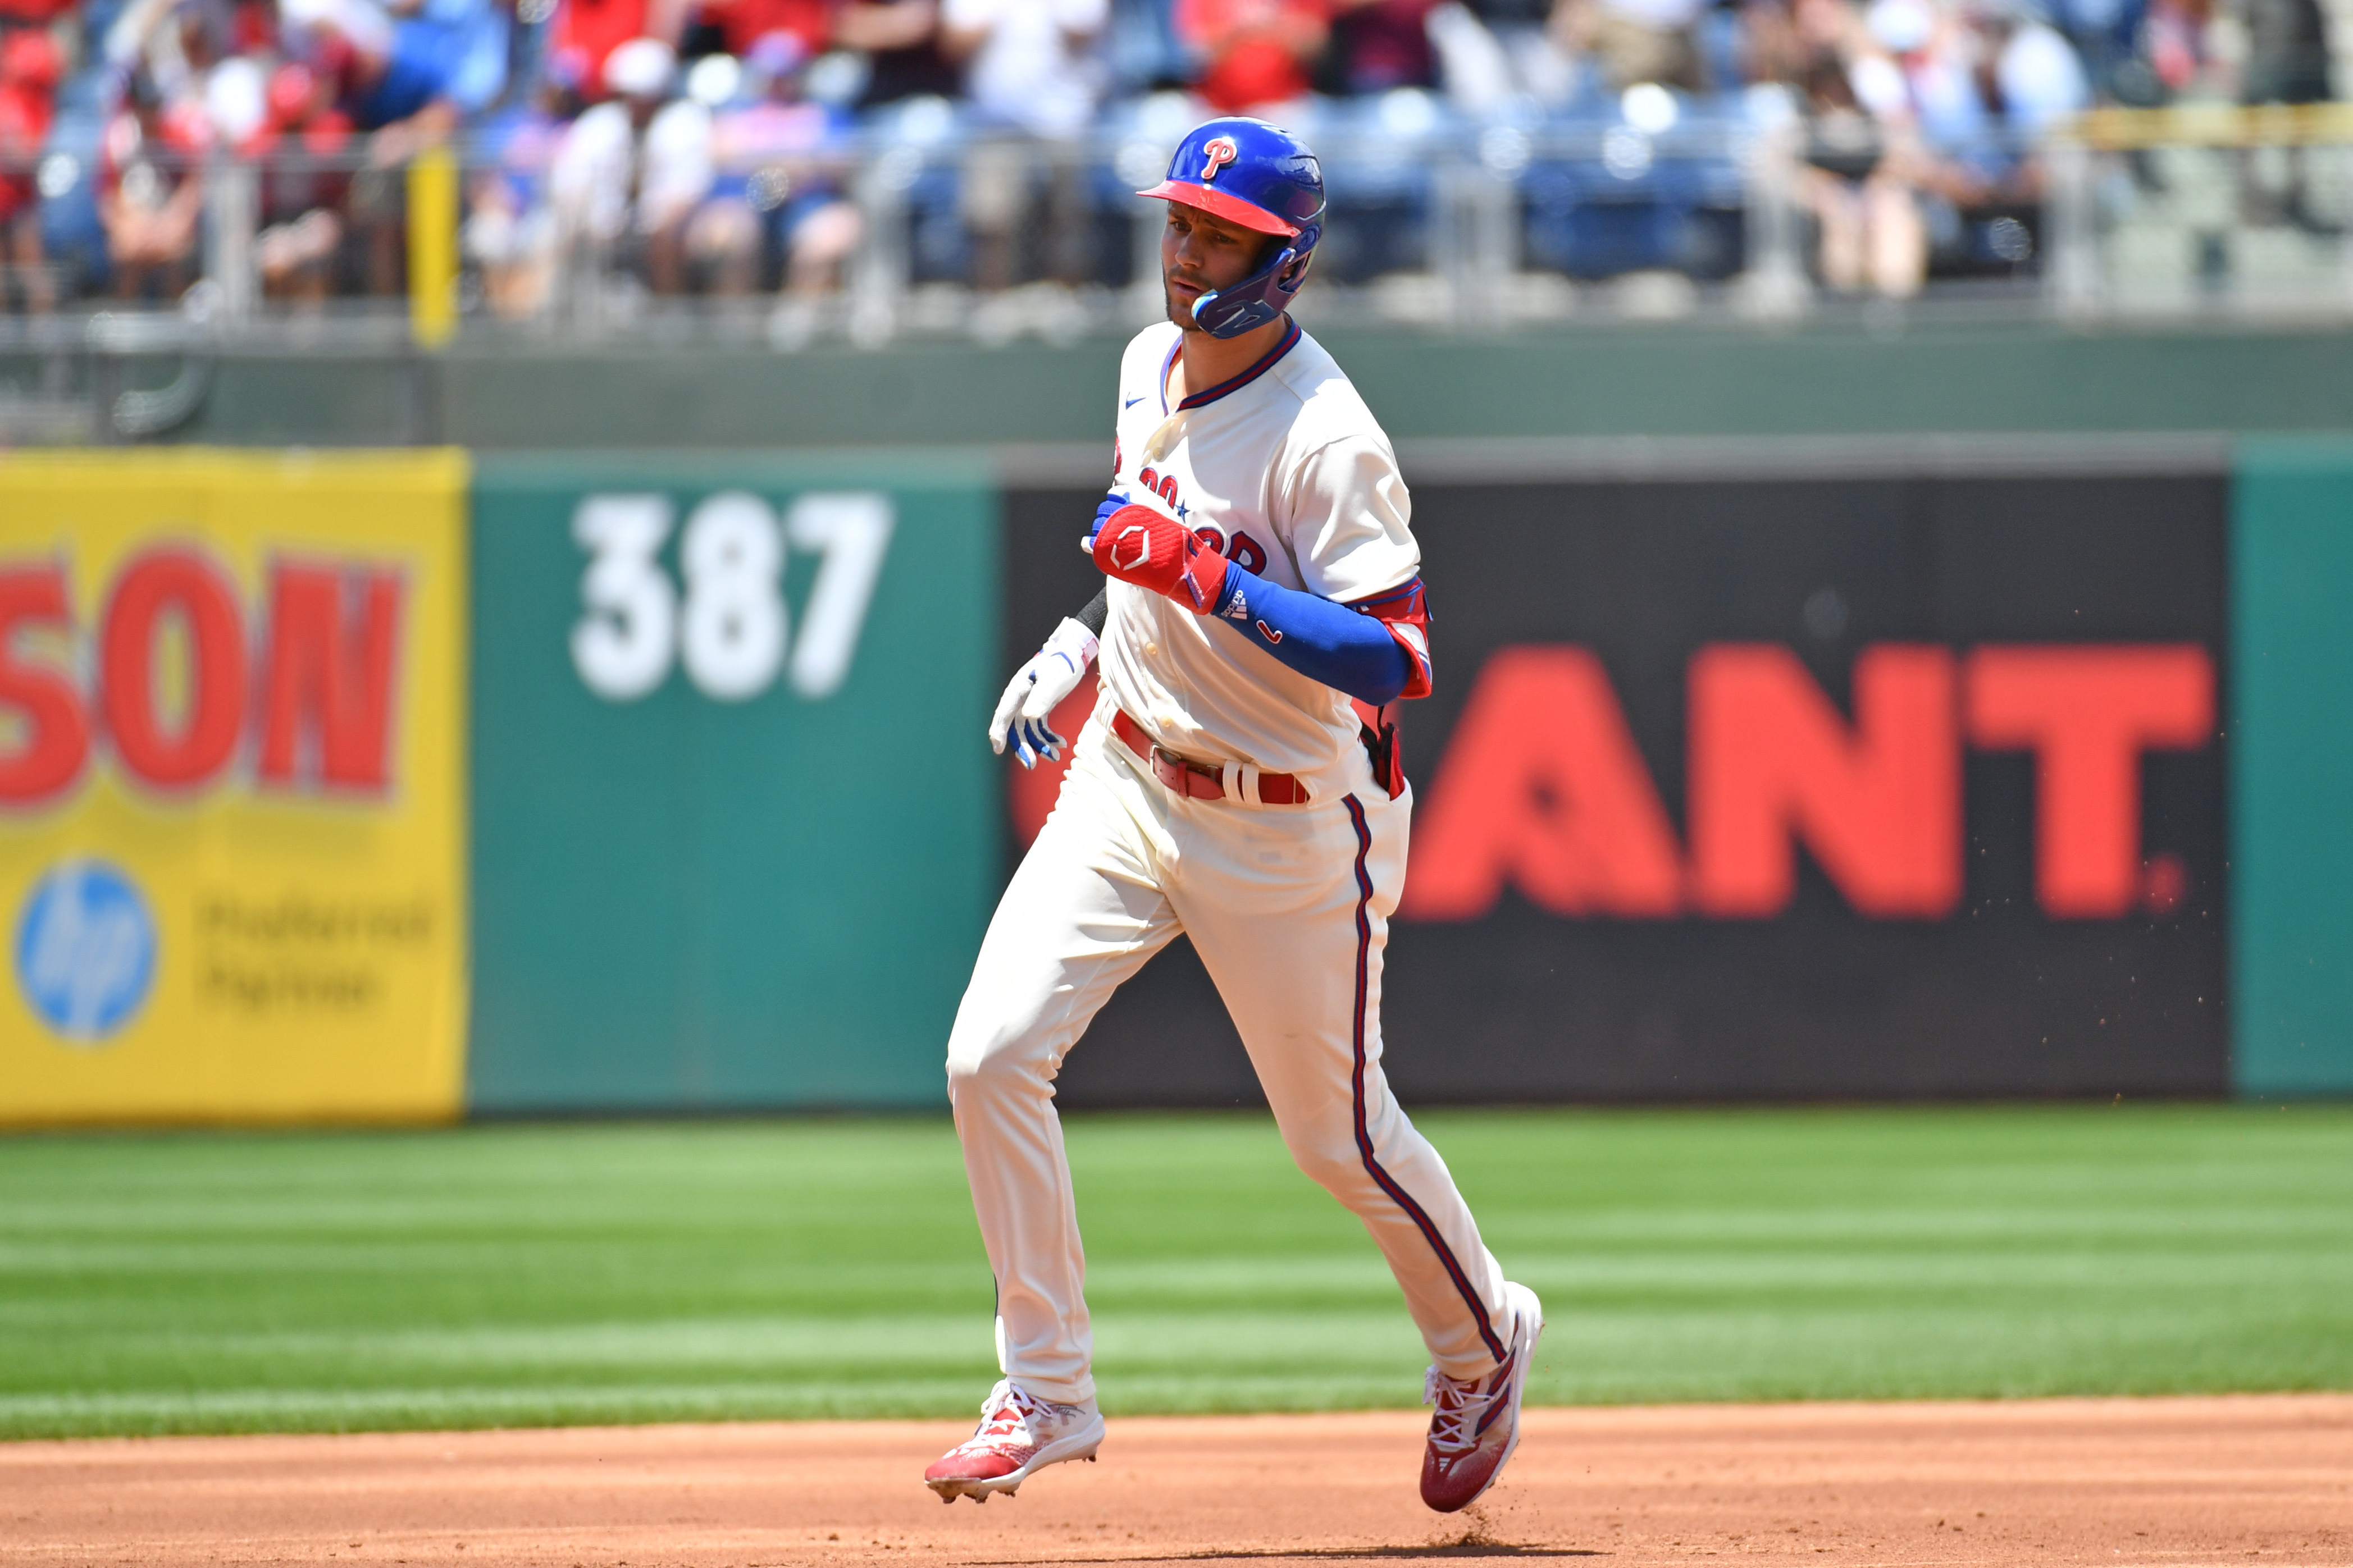 Phillies take advantage of Mets' mistakes for narrow win